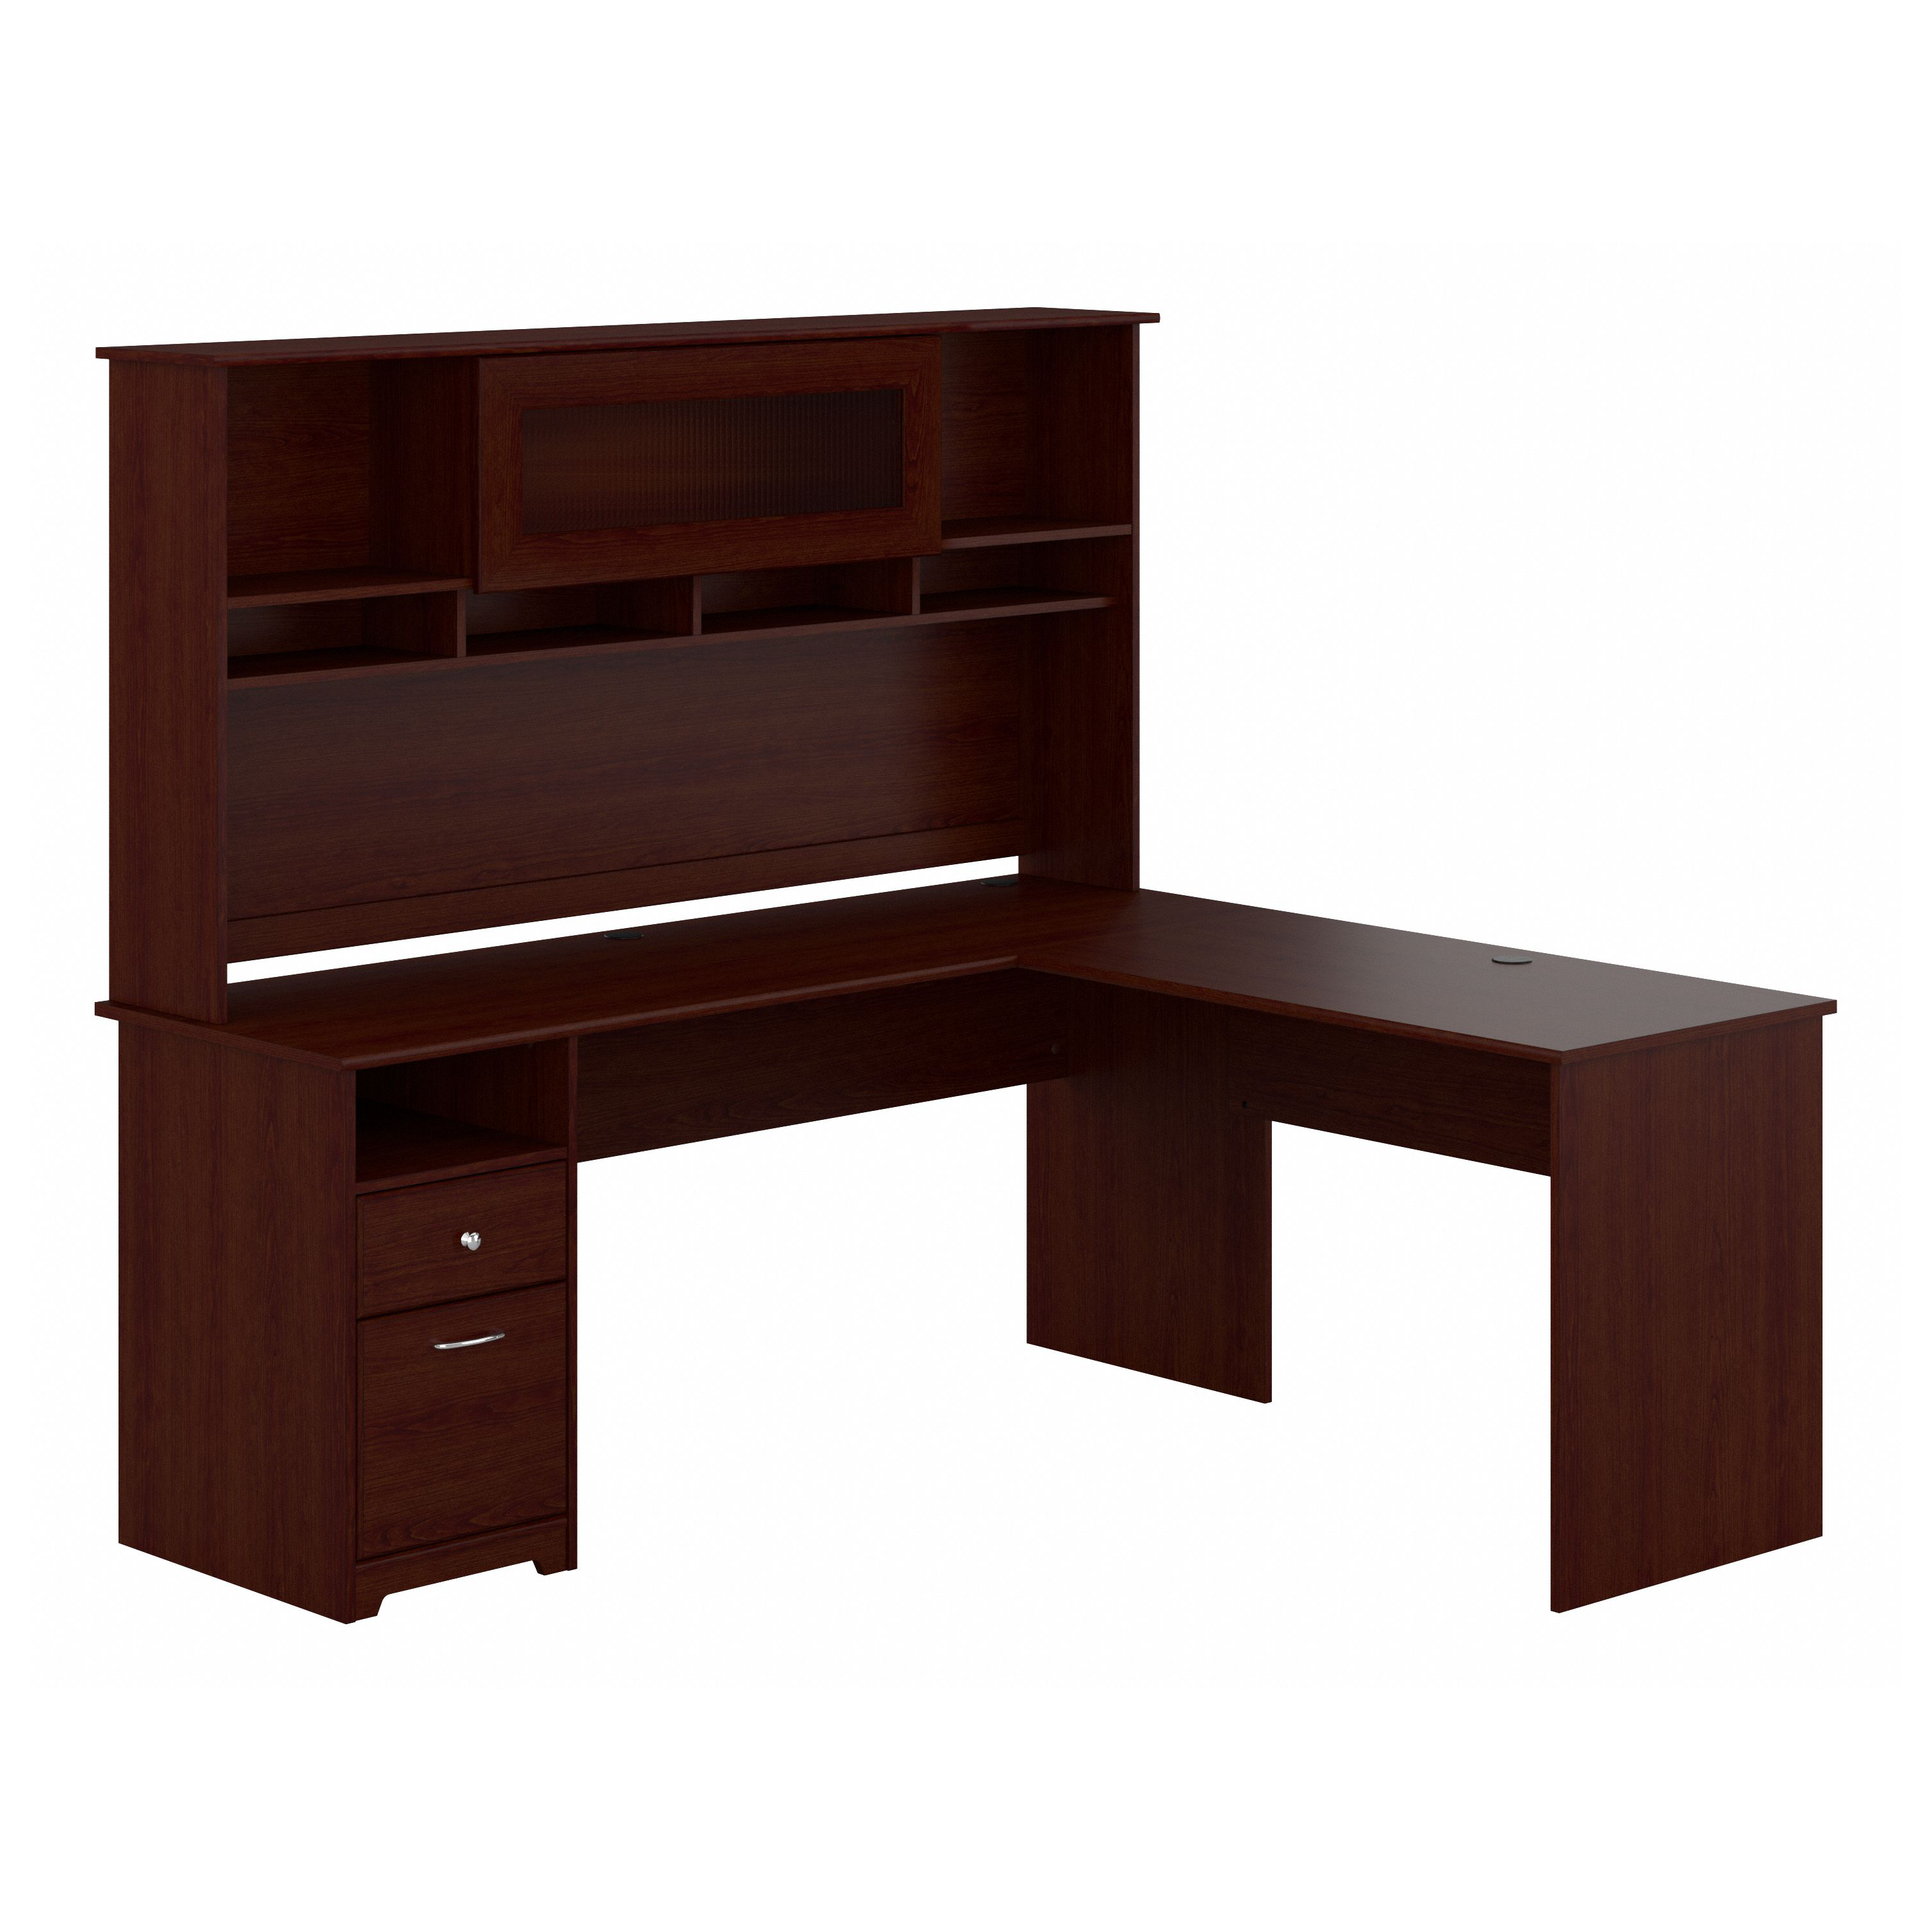 Shop Bush Furniture Cabot 72W L Shaped Computer Desk with Hutch and Drawers 02 CAB053HVC #color_harvest cherry